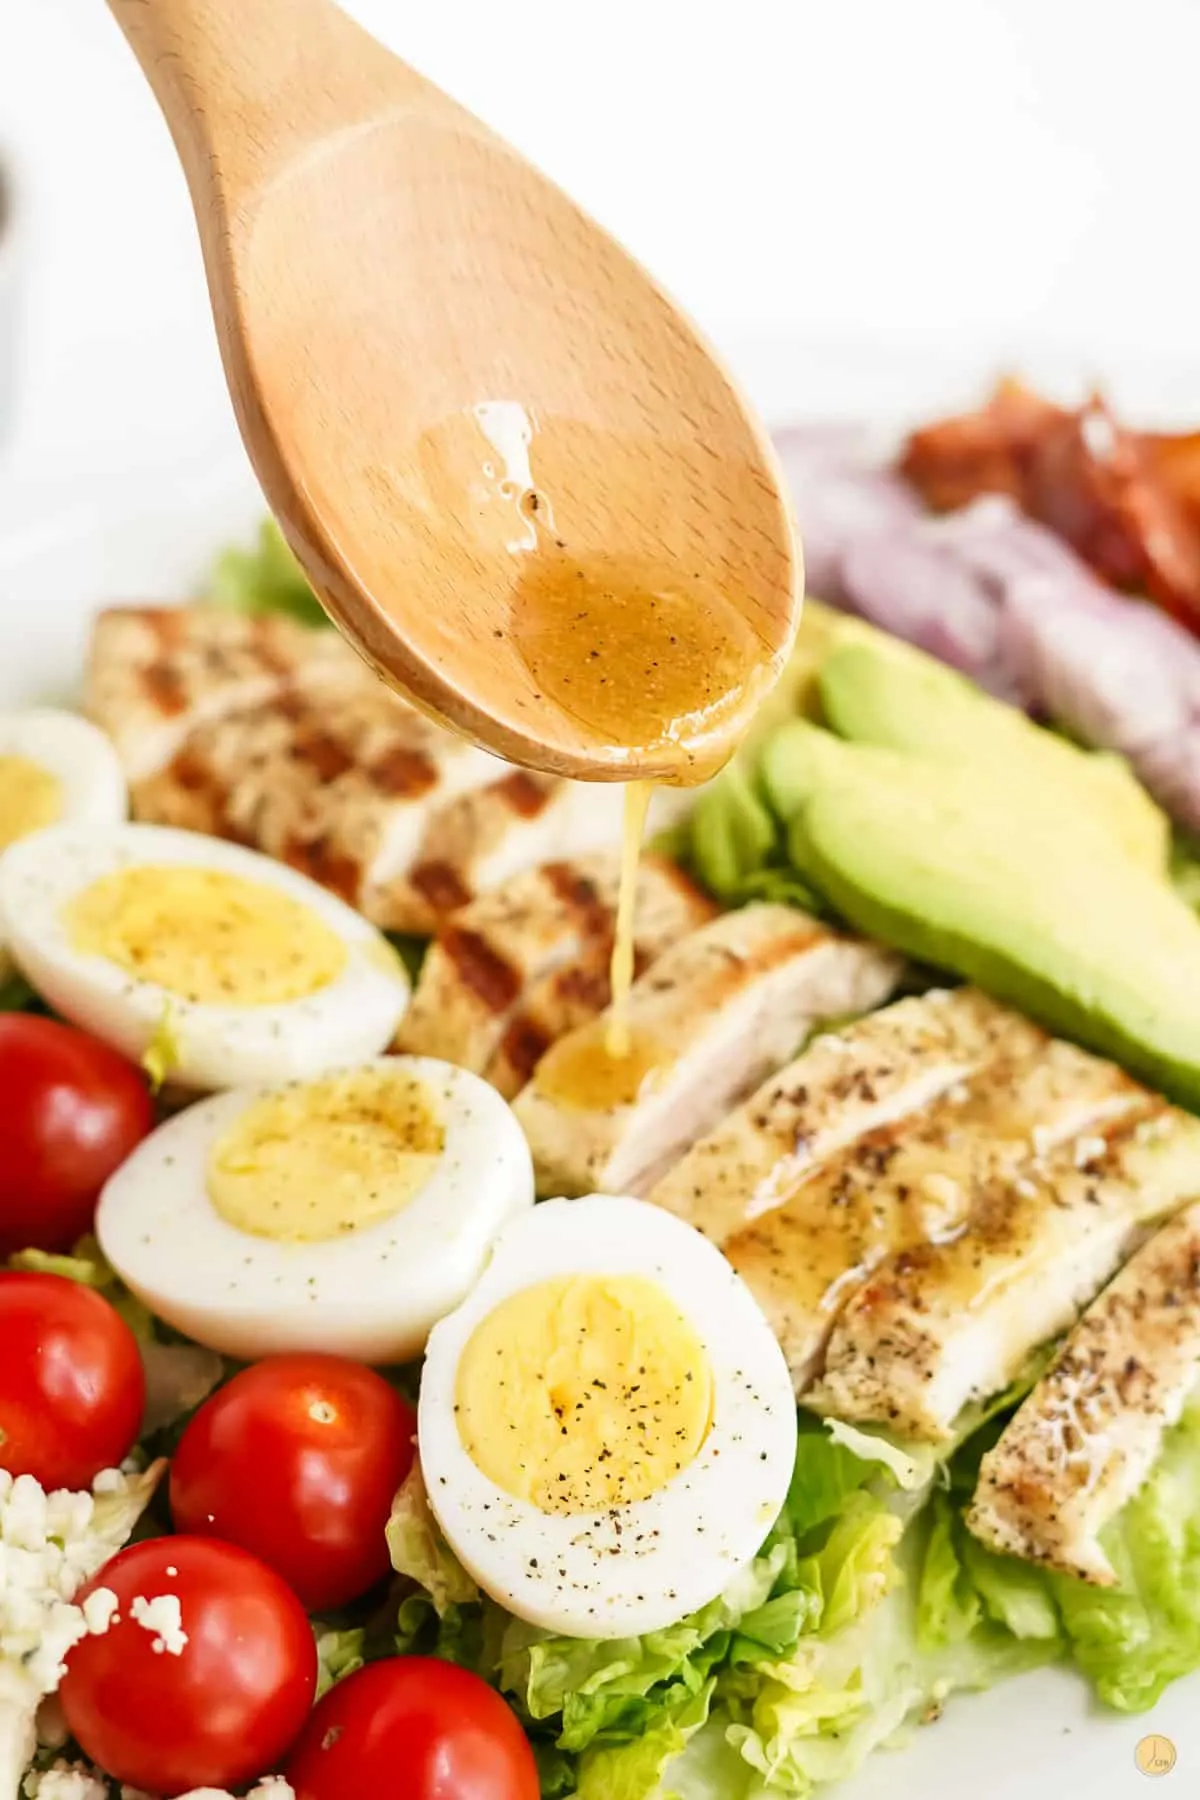 spoon drizzling salad dressing on eggs